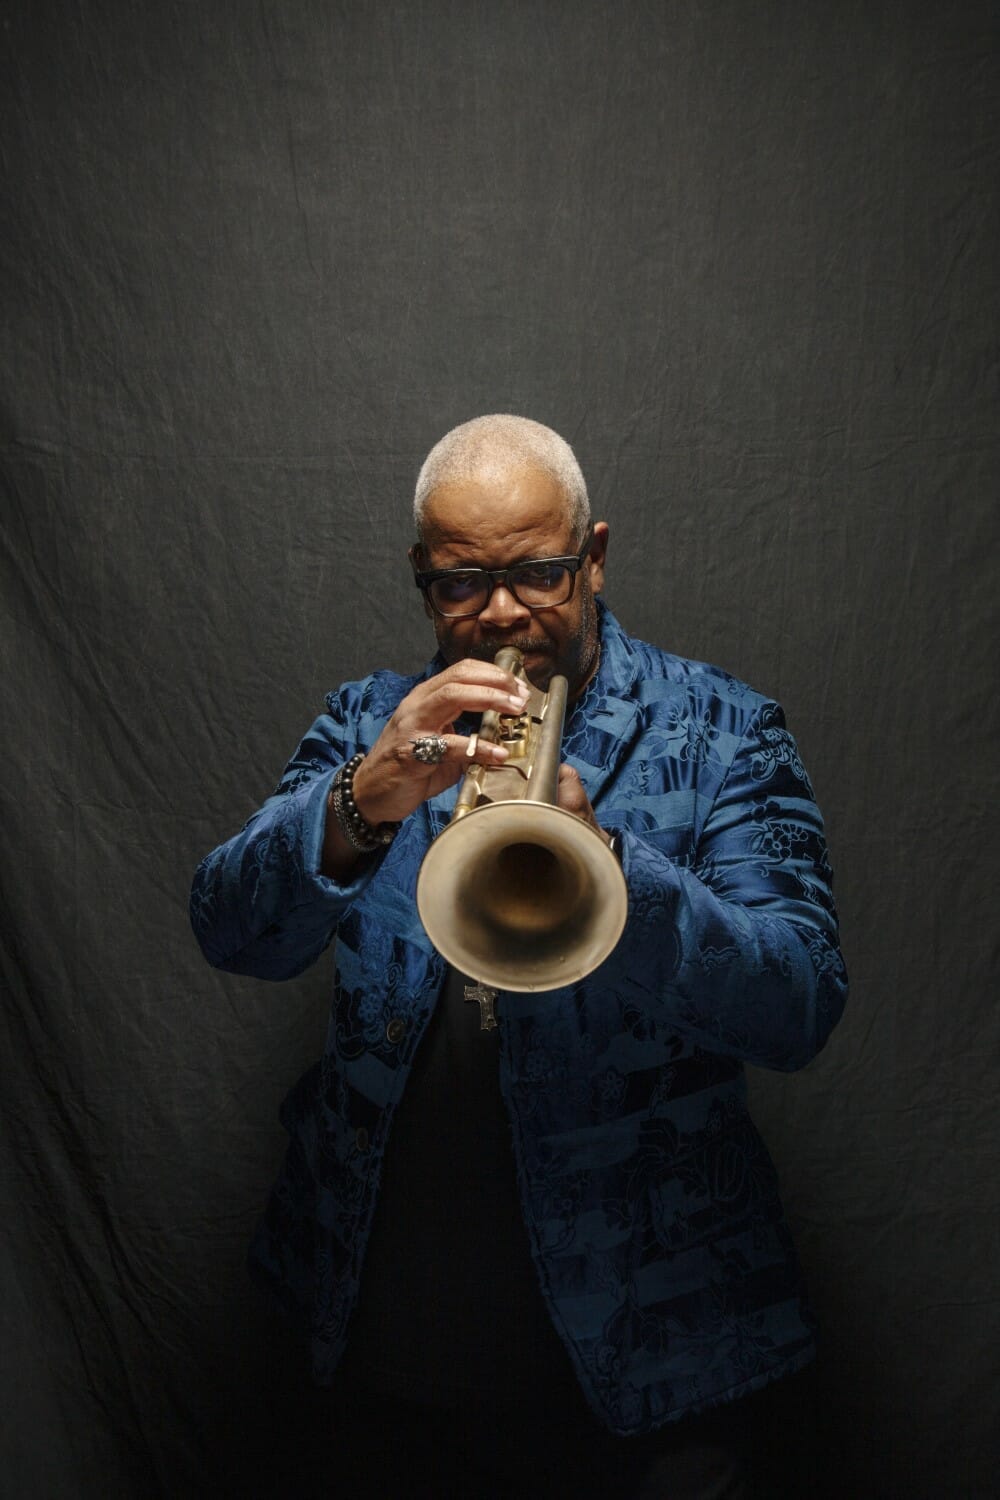 New York Public Library for the Performing Arts CHAMPION: TERENCE BLANCHARD IN CONVERSATION